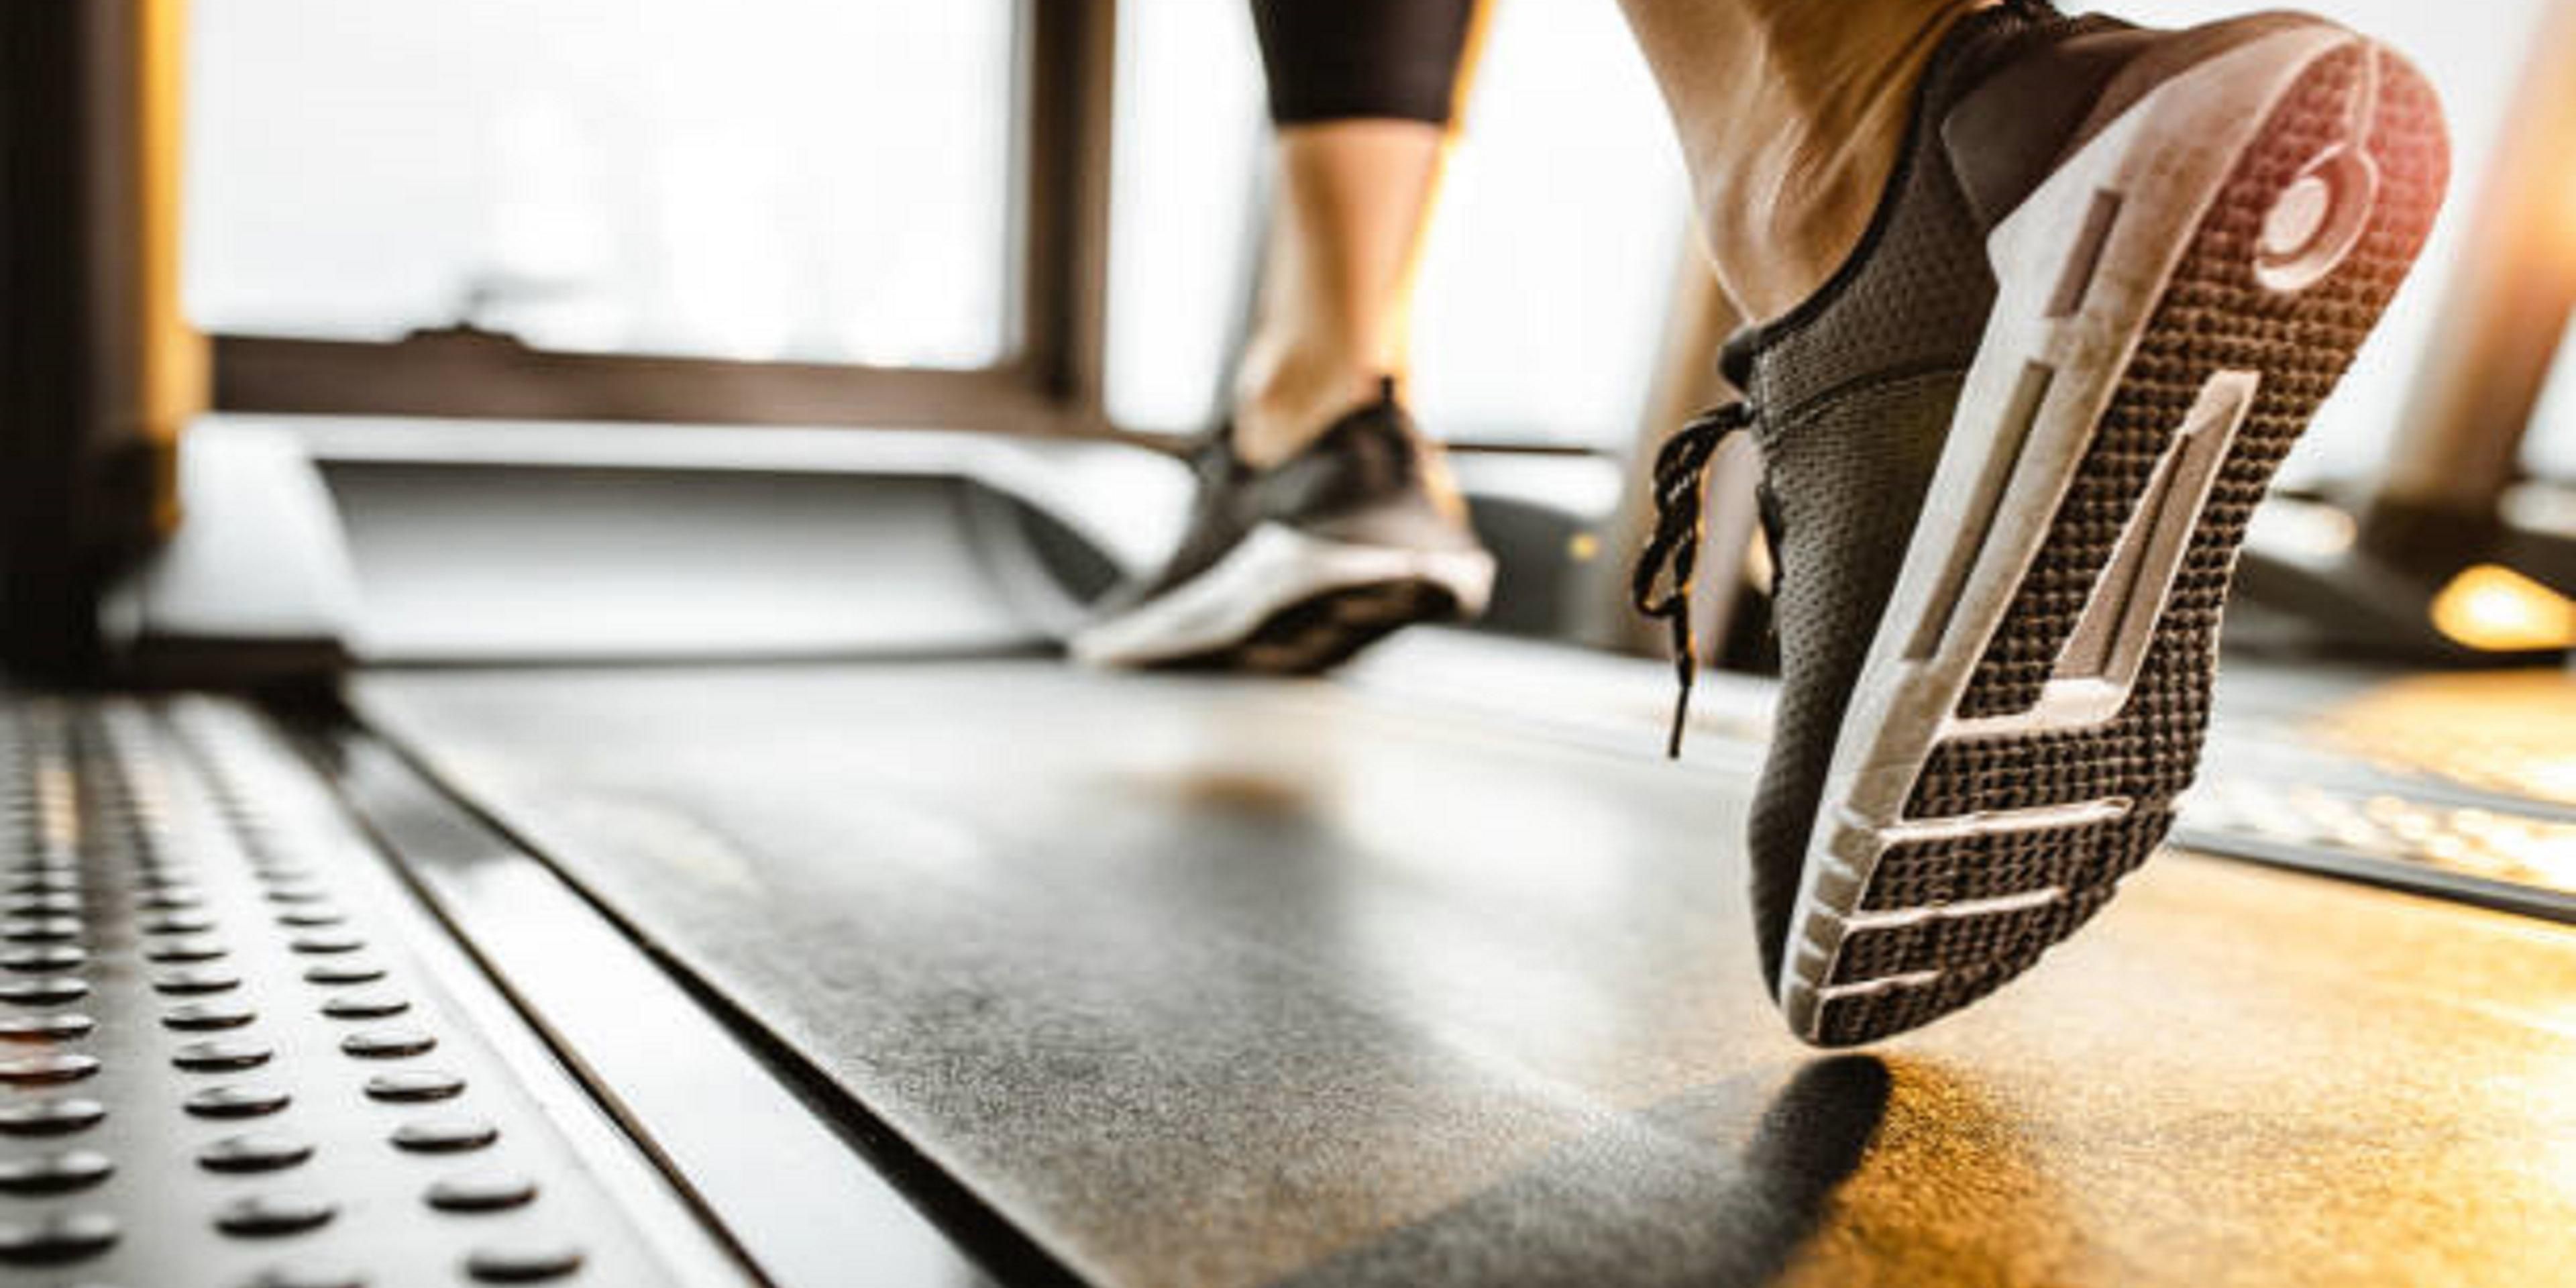 Get your sweat on in our complimentary, fully equipped fitness center with stair stepper, treadmill elliptical machines, free weights and stationary bicycle open 24 hours.